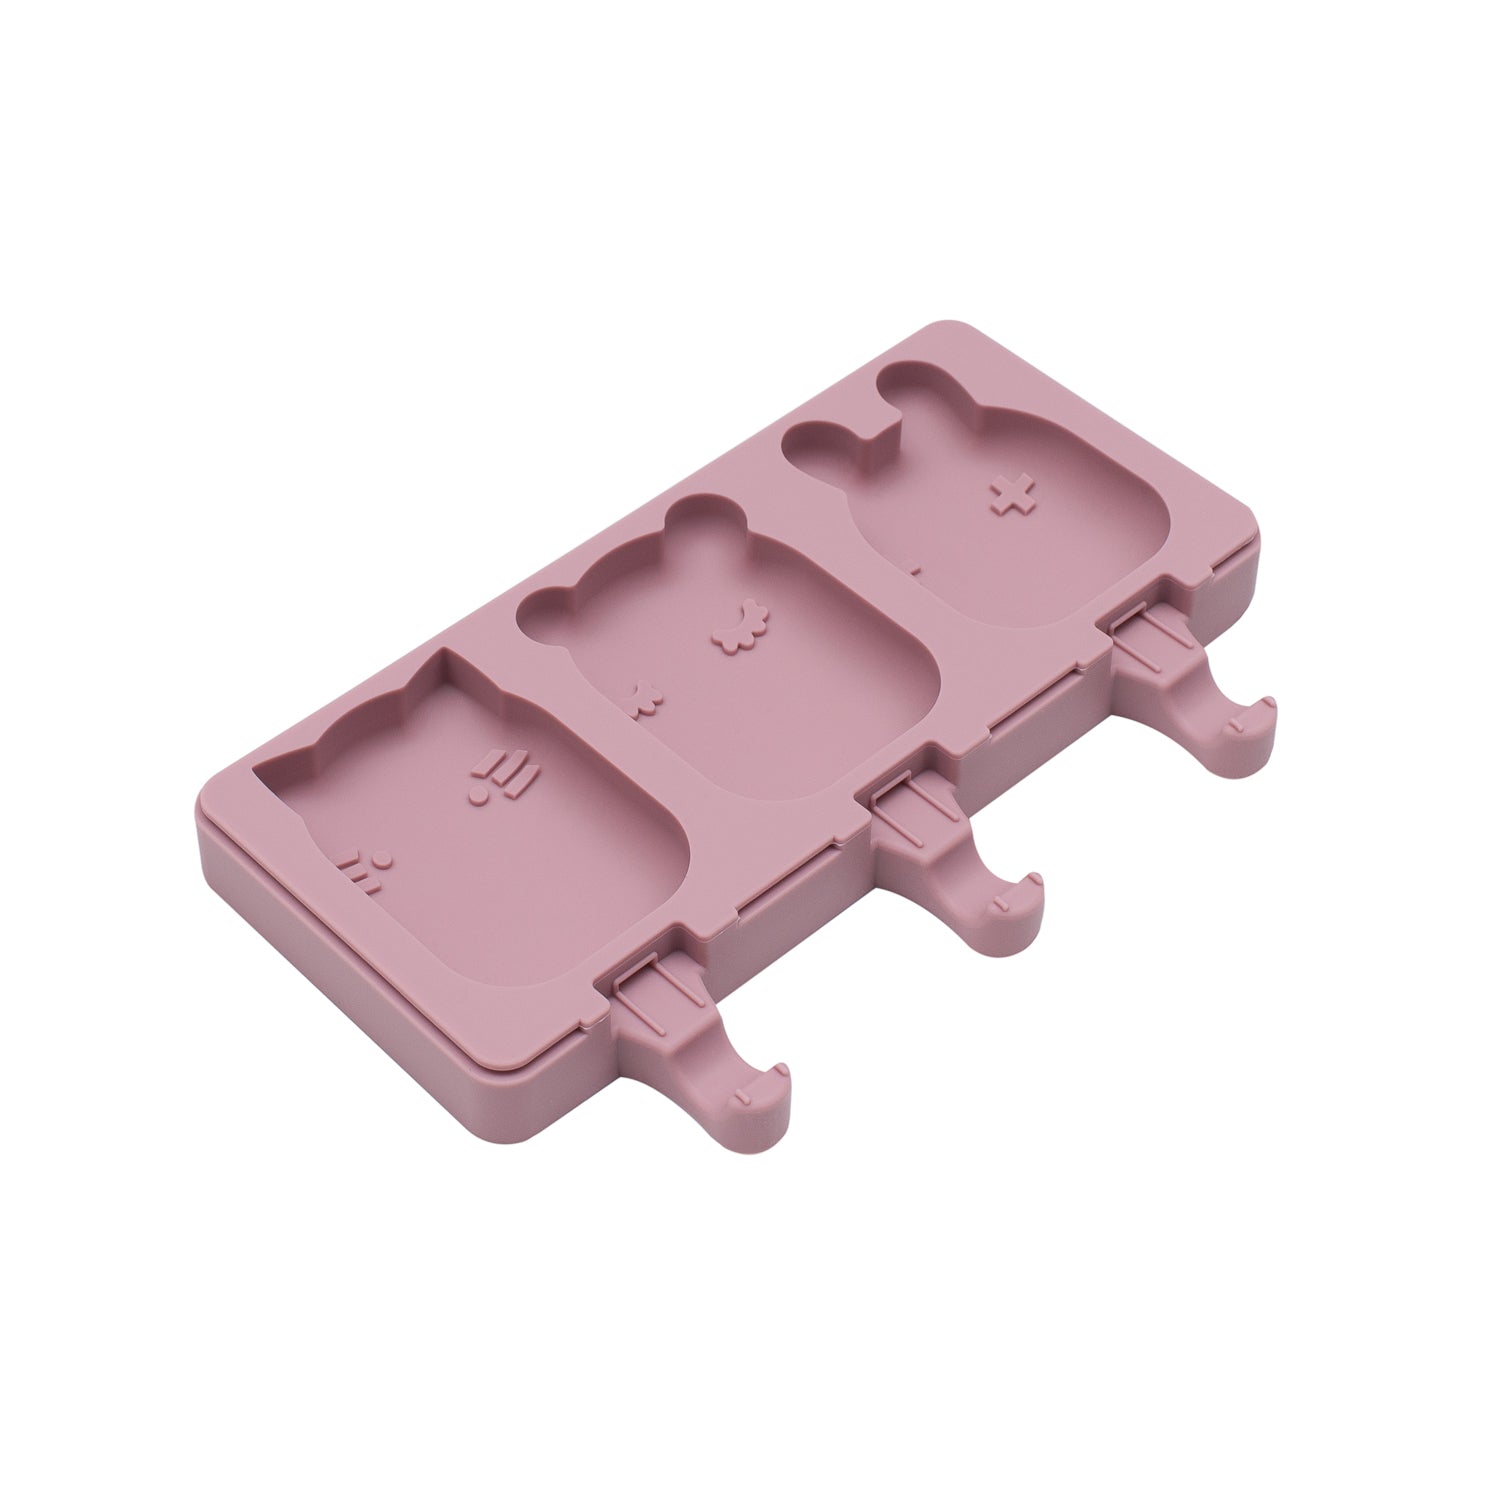 Frosties Icy pole Mould - Dusty Rose